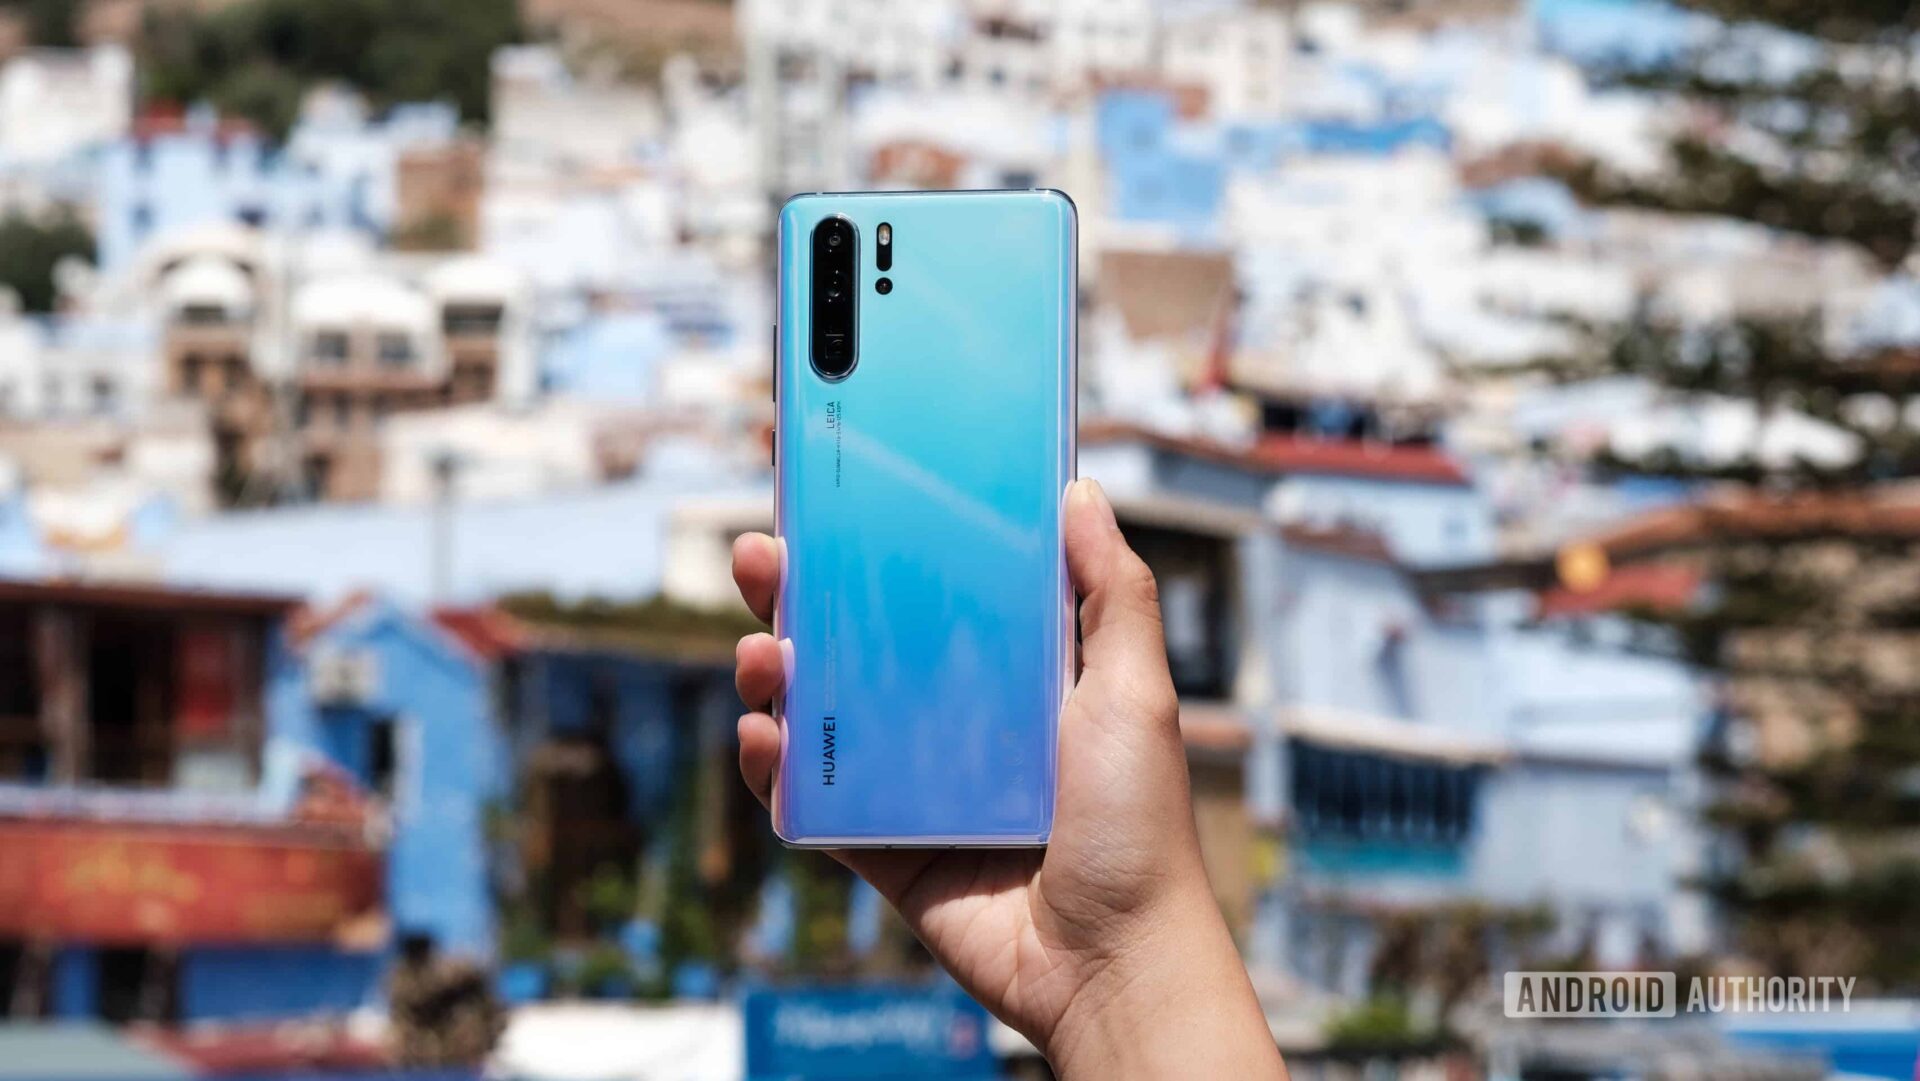 HUAWEI P30 Lite New Edition is a 2019 phone in 2020 - Android Authority